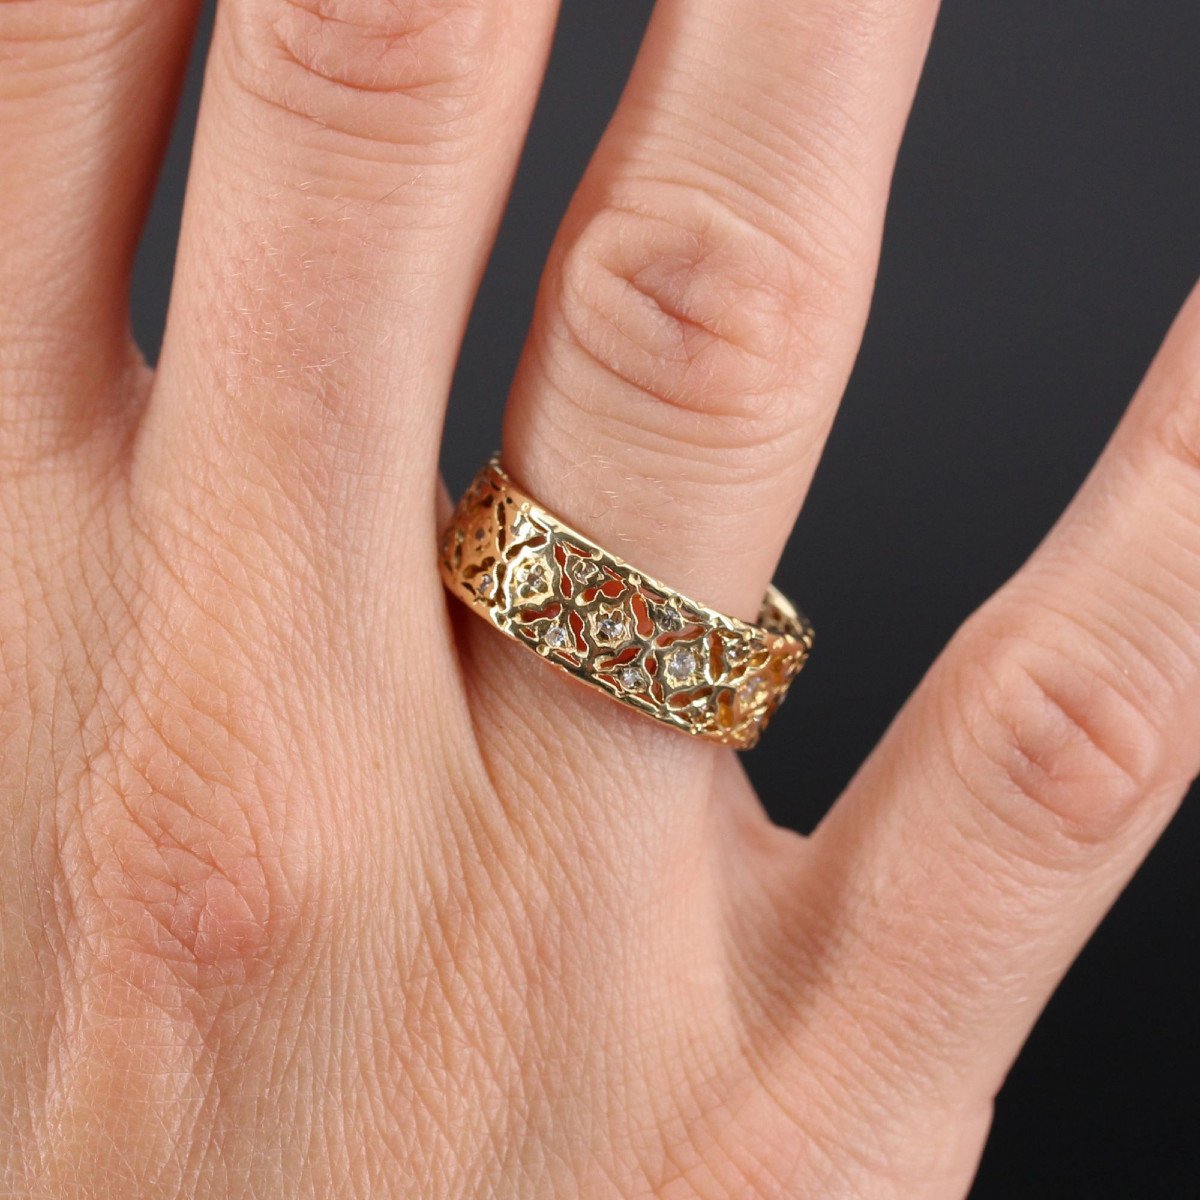 Old Ring In Gold And Diamonds-photo-4